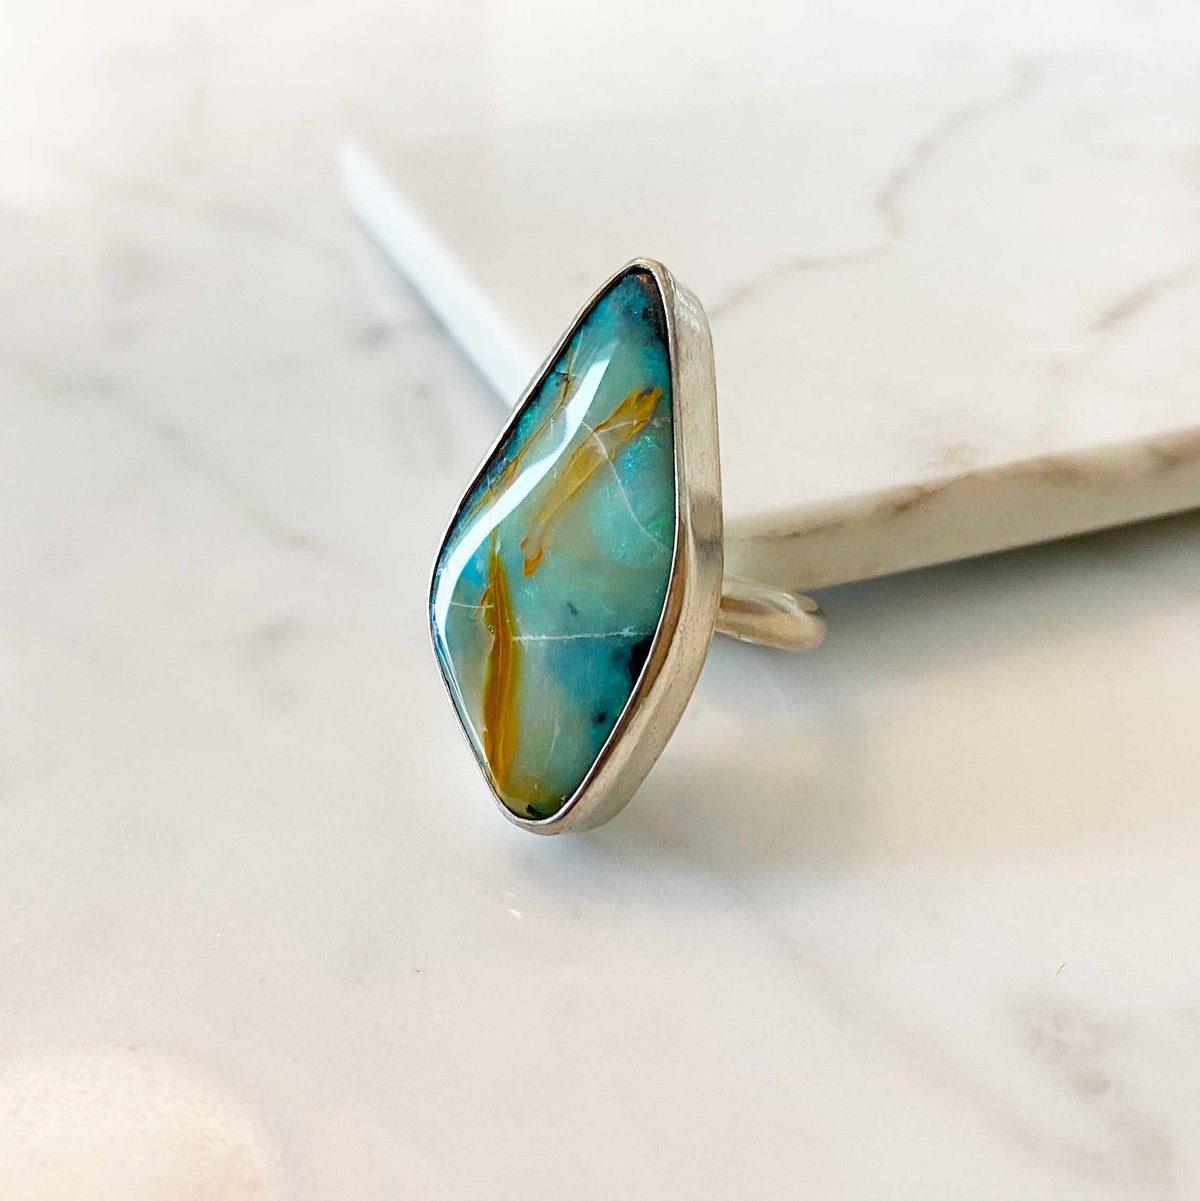 Dreamy Boulder Opal Sterling Silver Ring, One of a Kind